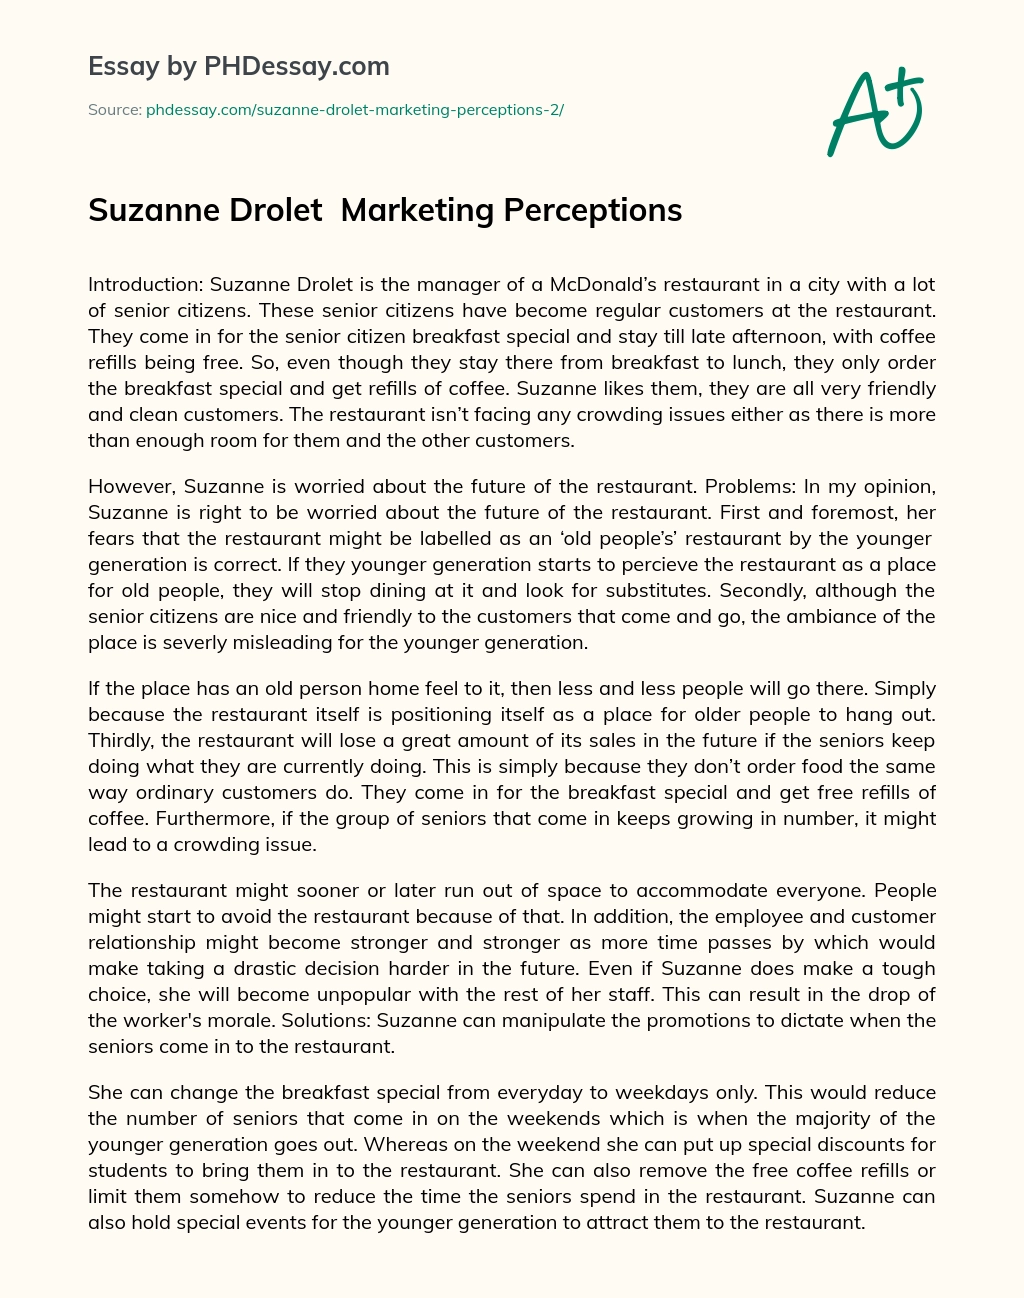 Suzanne Drolet  Marketing Perceptions essay